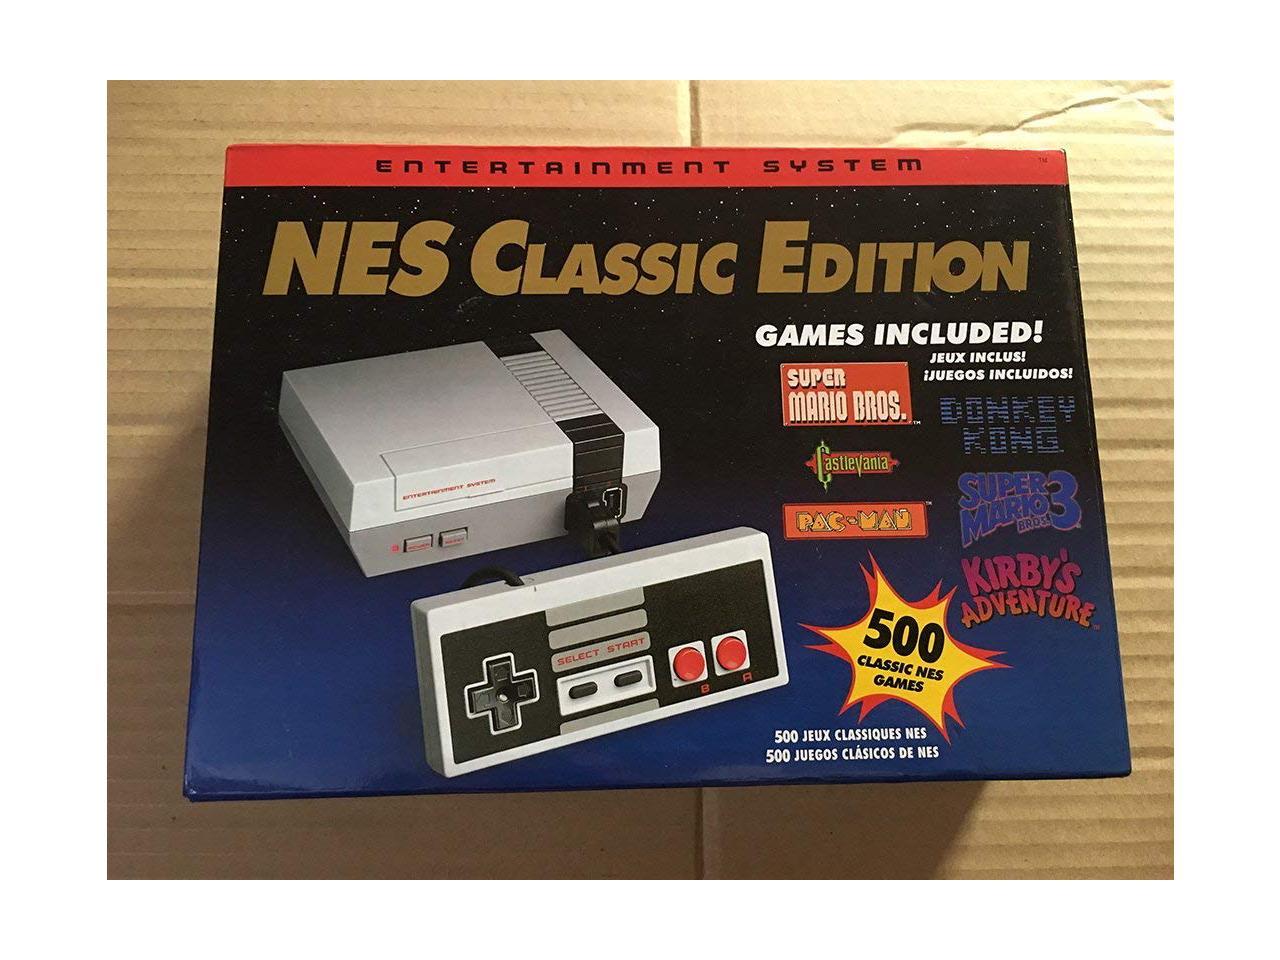 super nes classic with 400 games